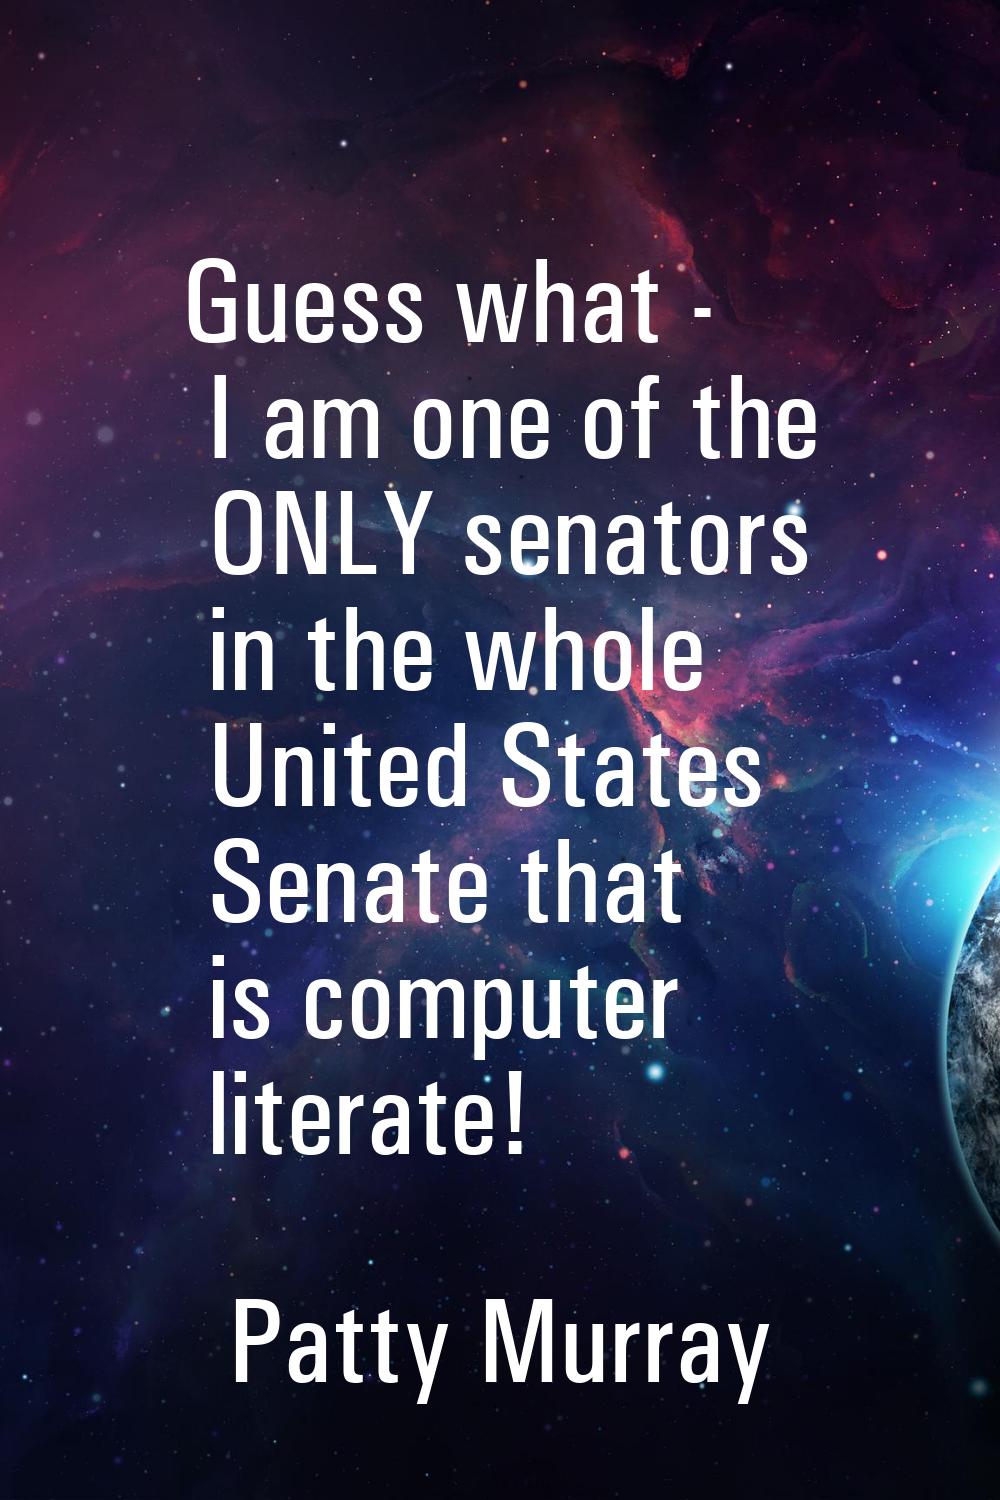 Guess what - I am one of the ONLY senators in the whole United States Senate that is computer liter